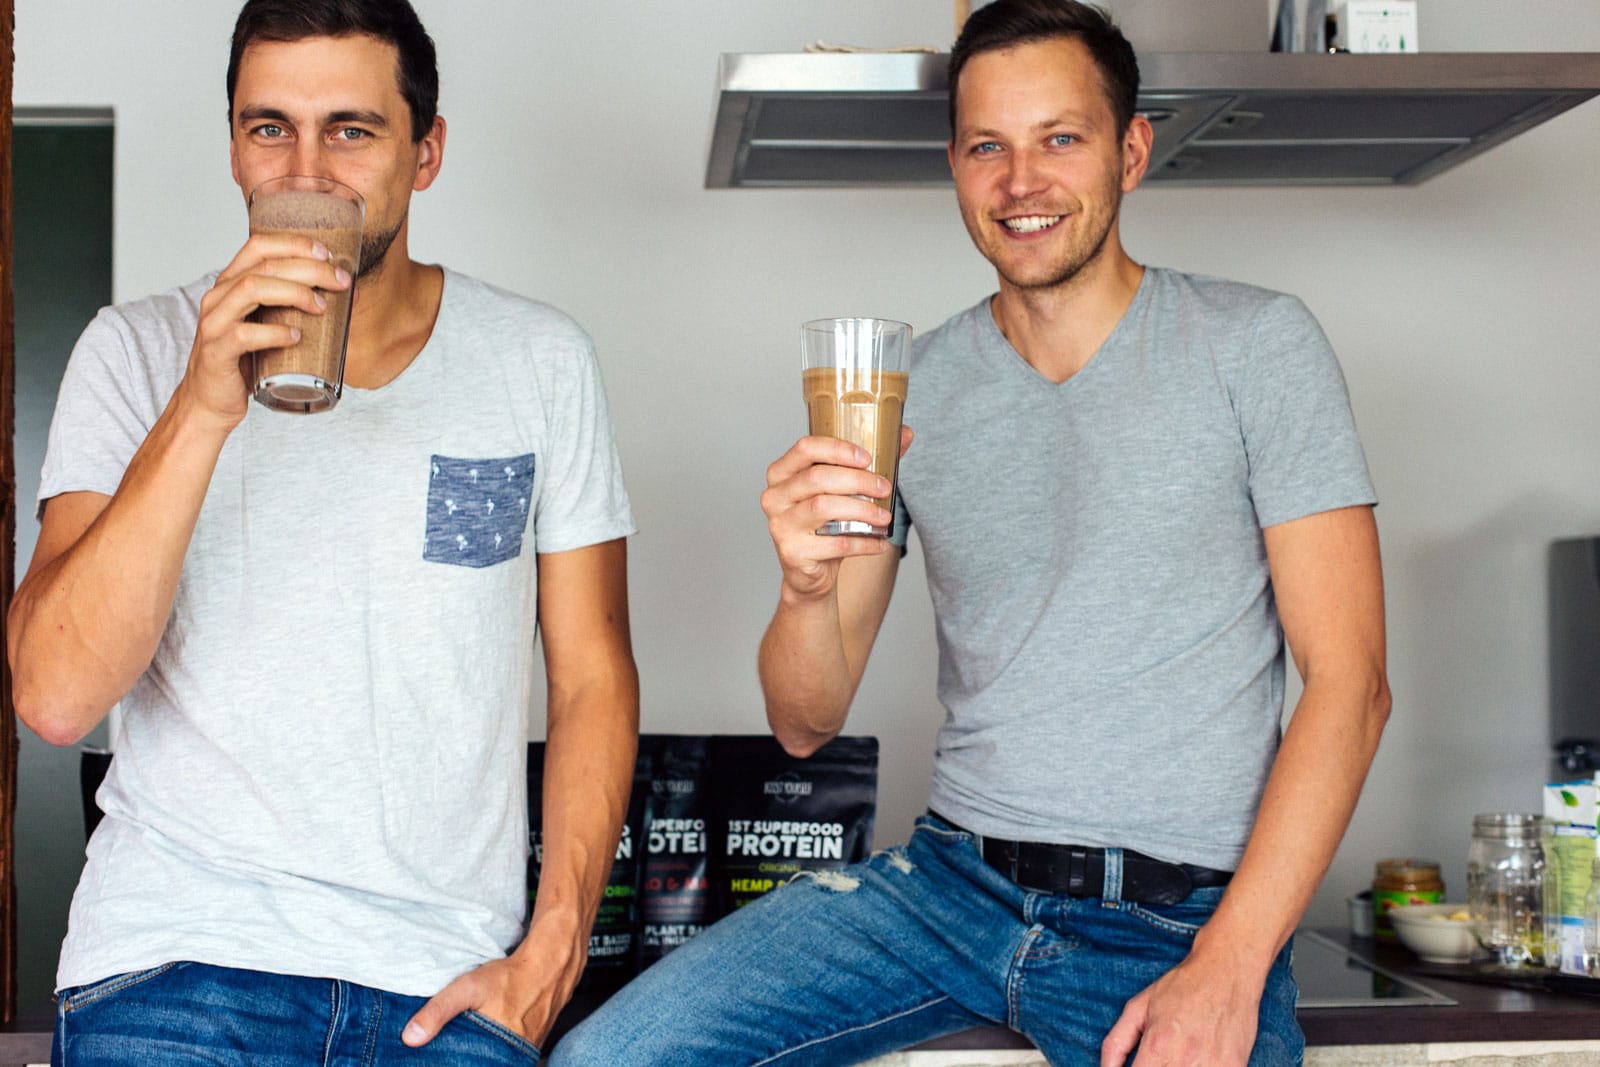 superfood protein boostyourself founders Boost Yourself